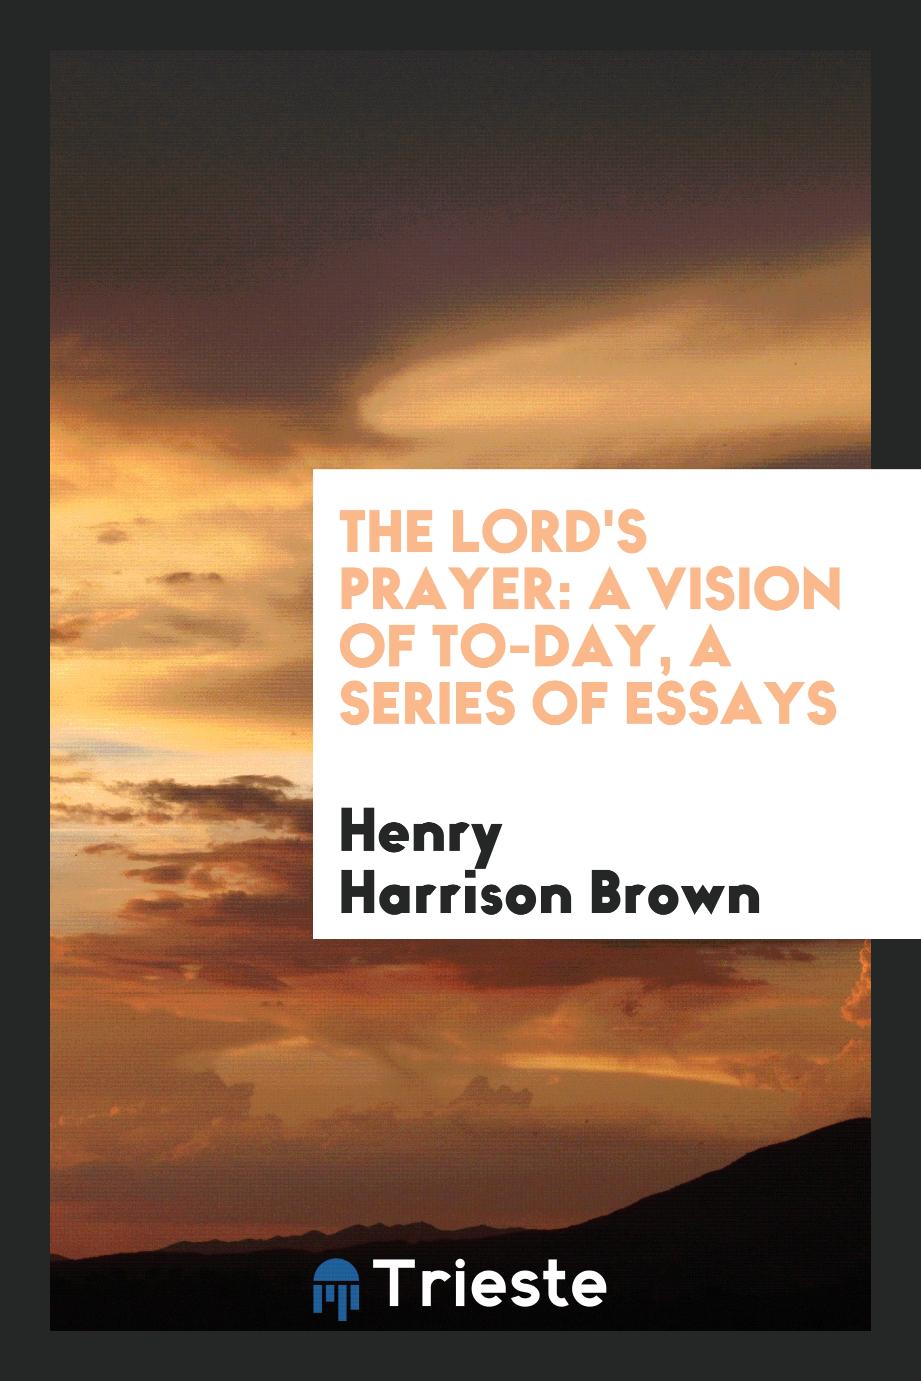 The Lord's Prayer: A Vision of To-Day, a Series of Essays